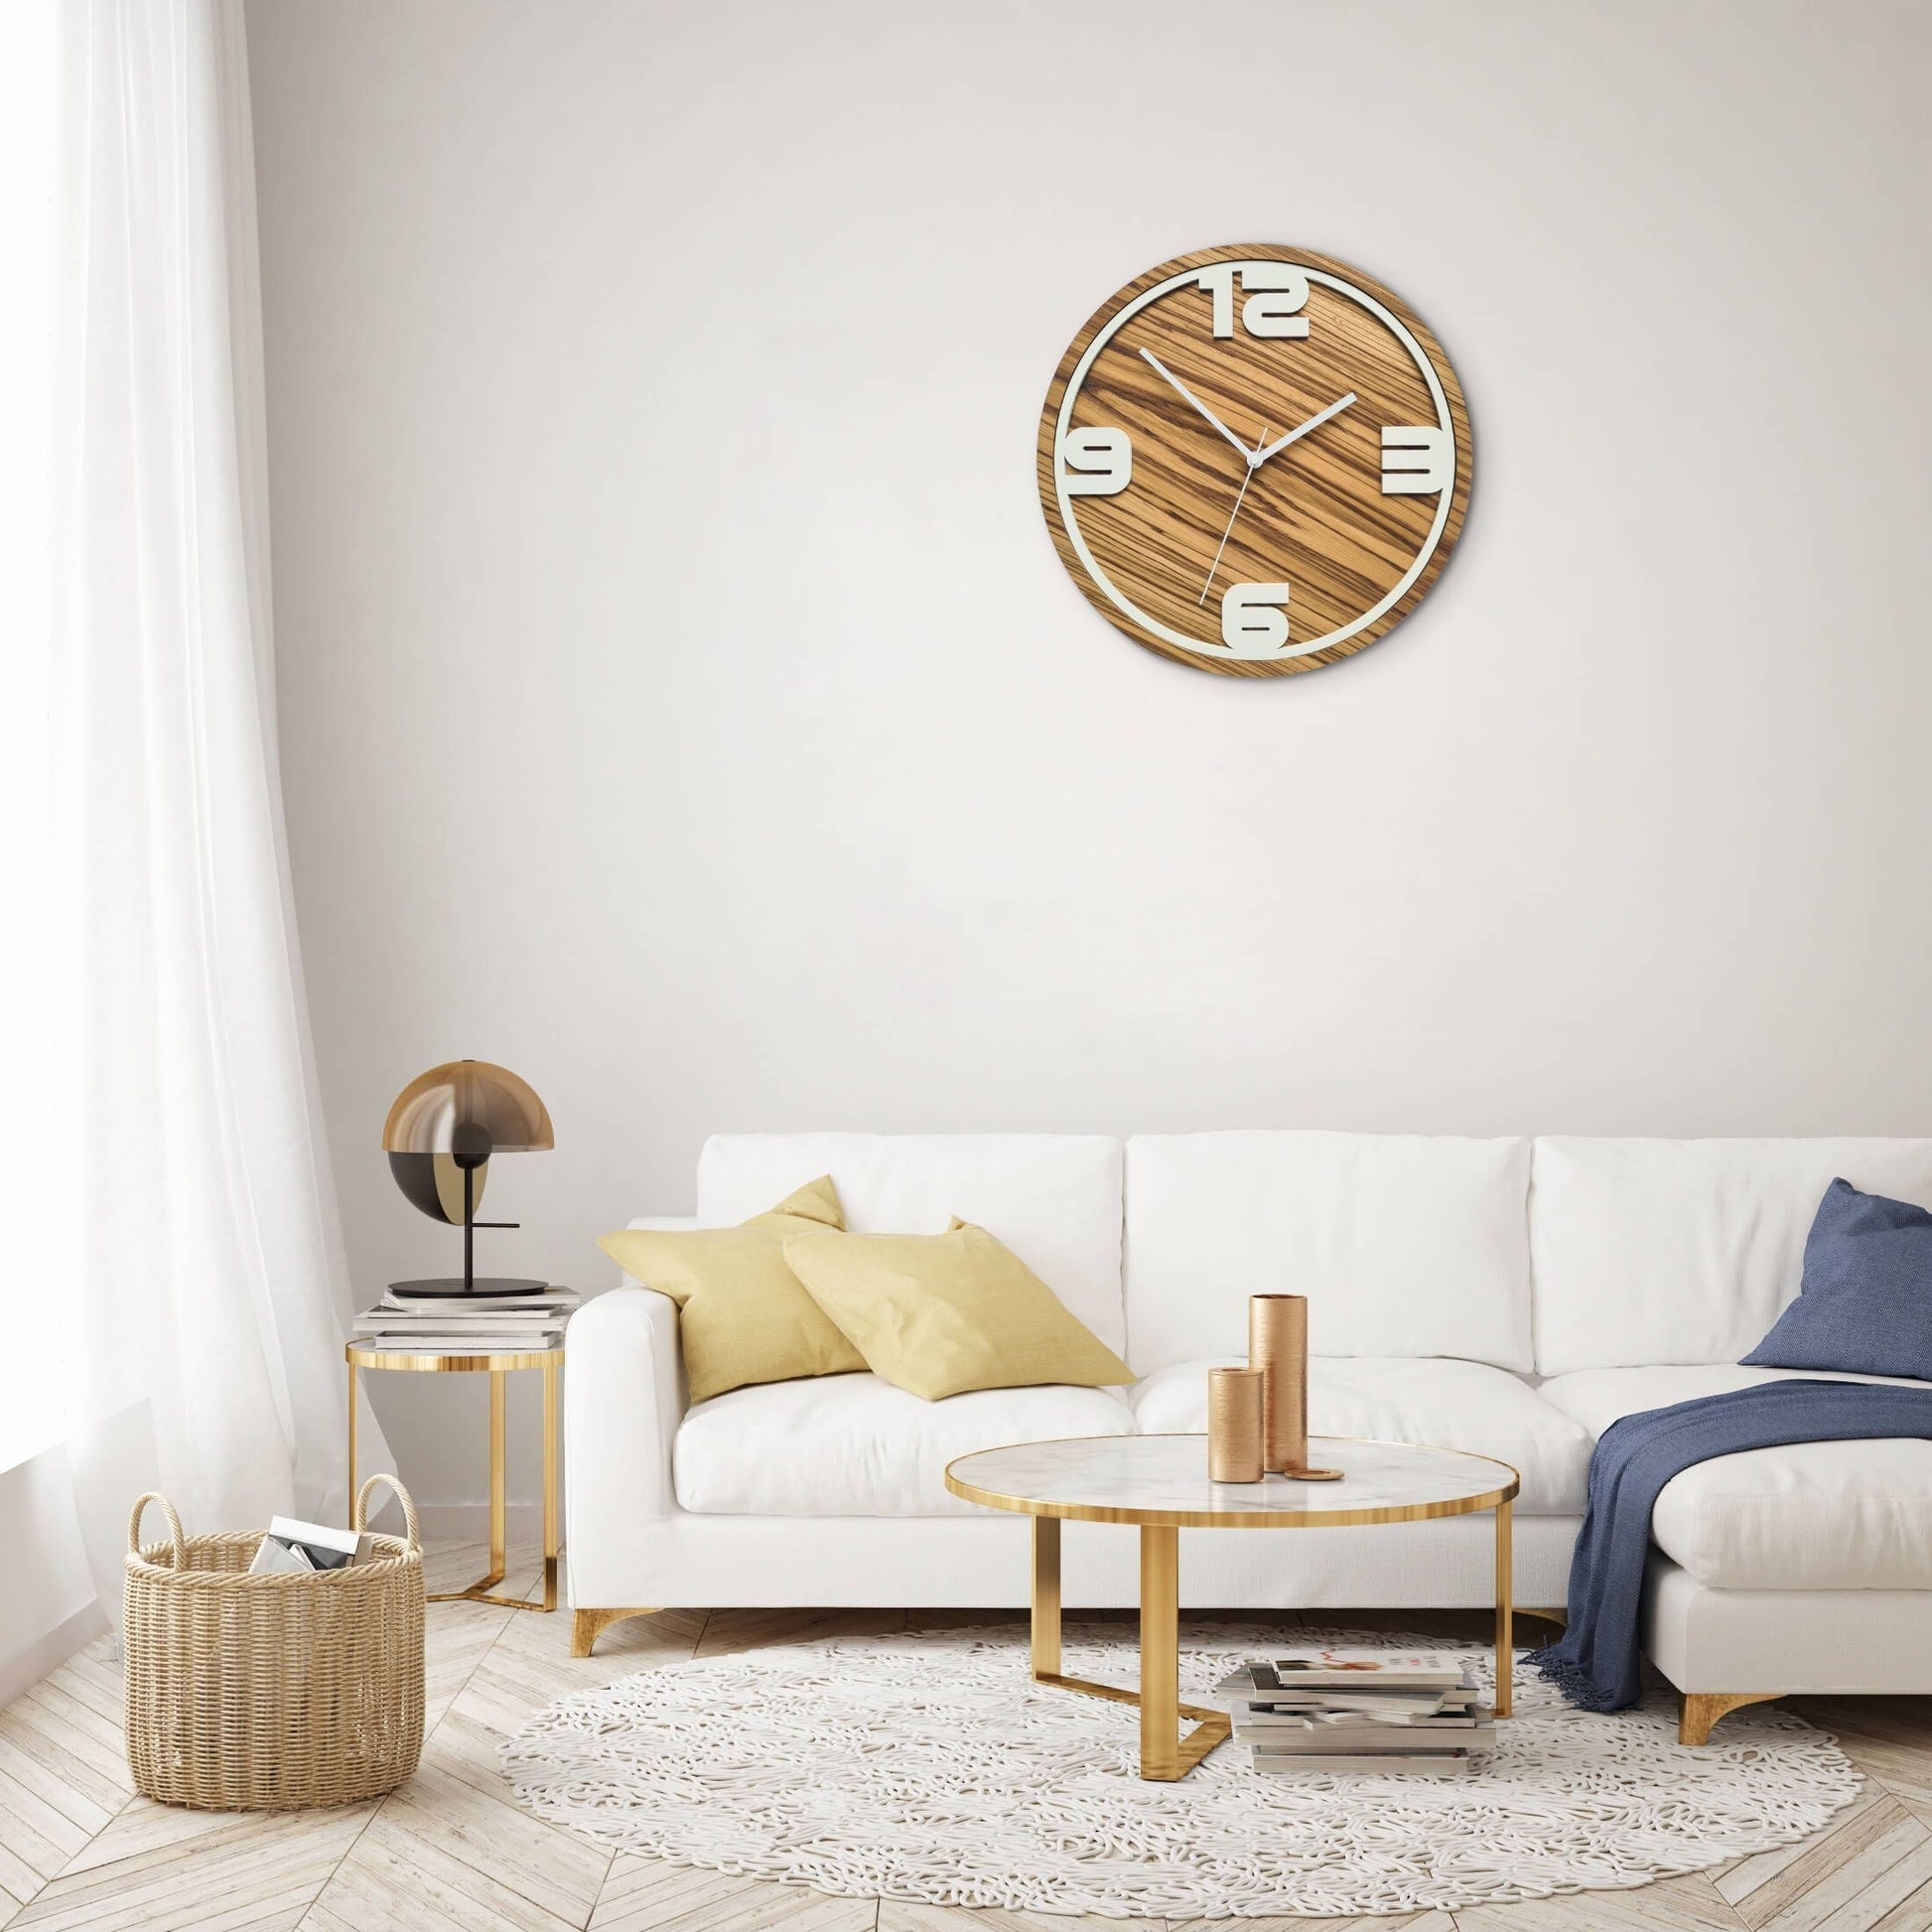 Boutique Wooden Wall Clock | Zebrano Wood Wall Clock | Modern number Wall Clock | Designer Clock - Clock Design Co™